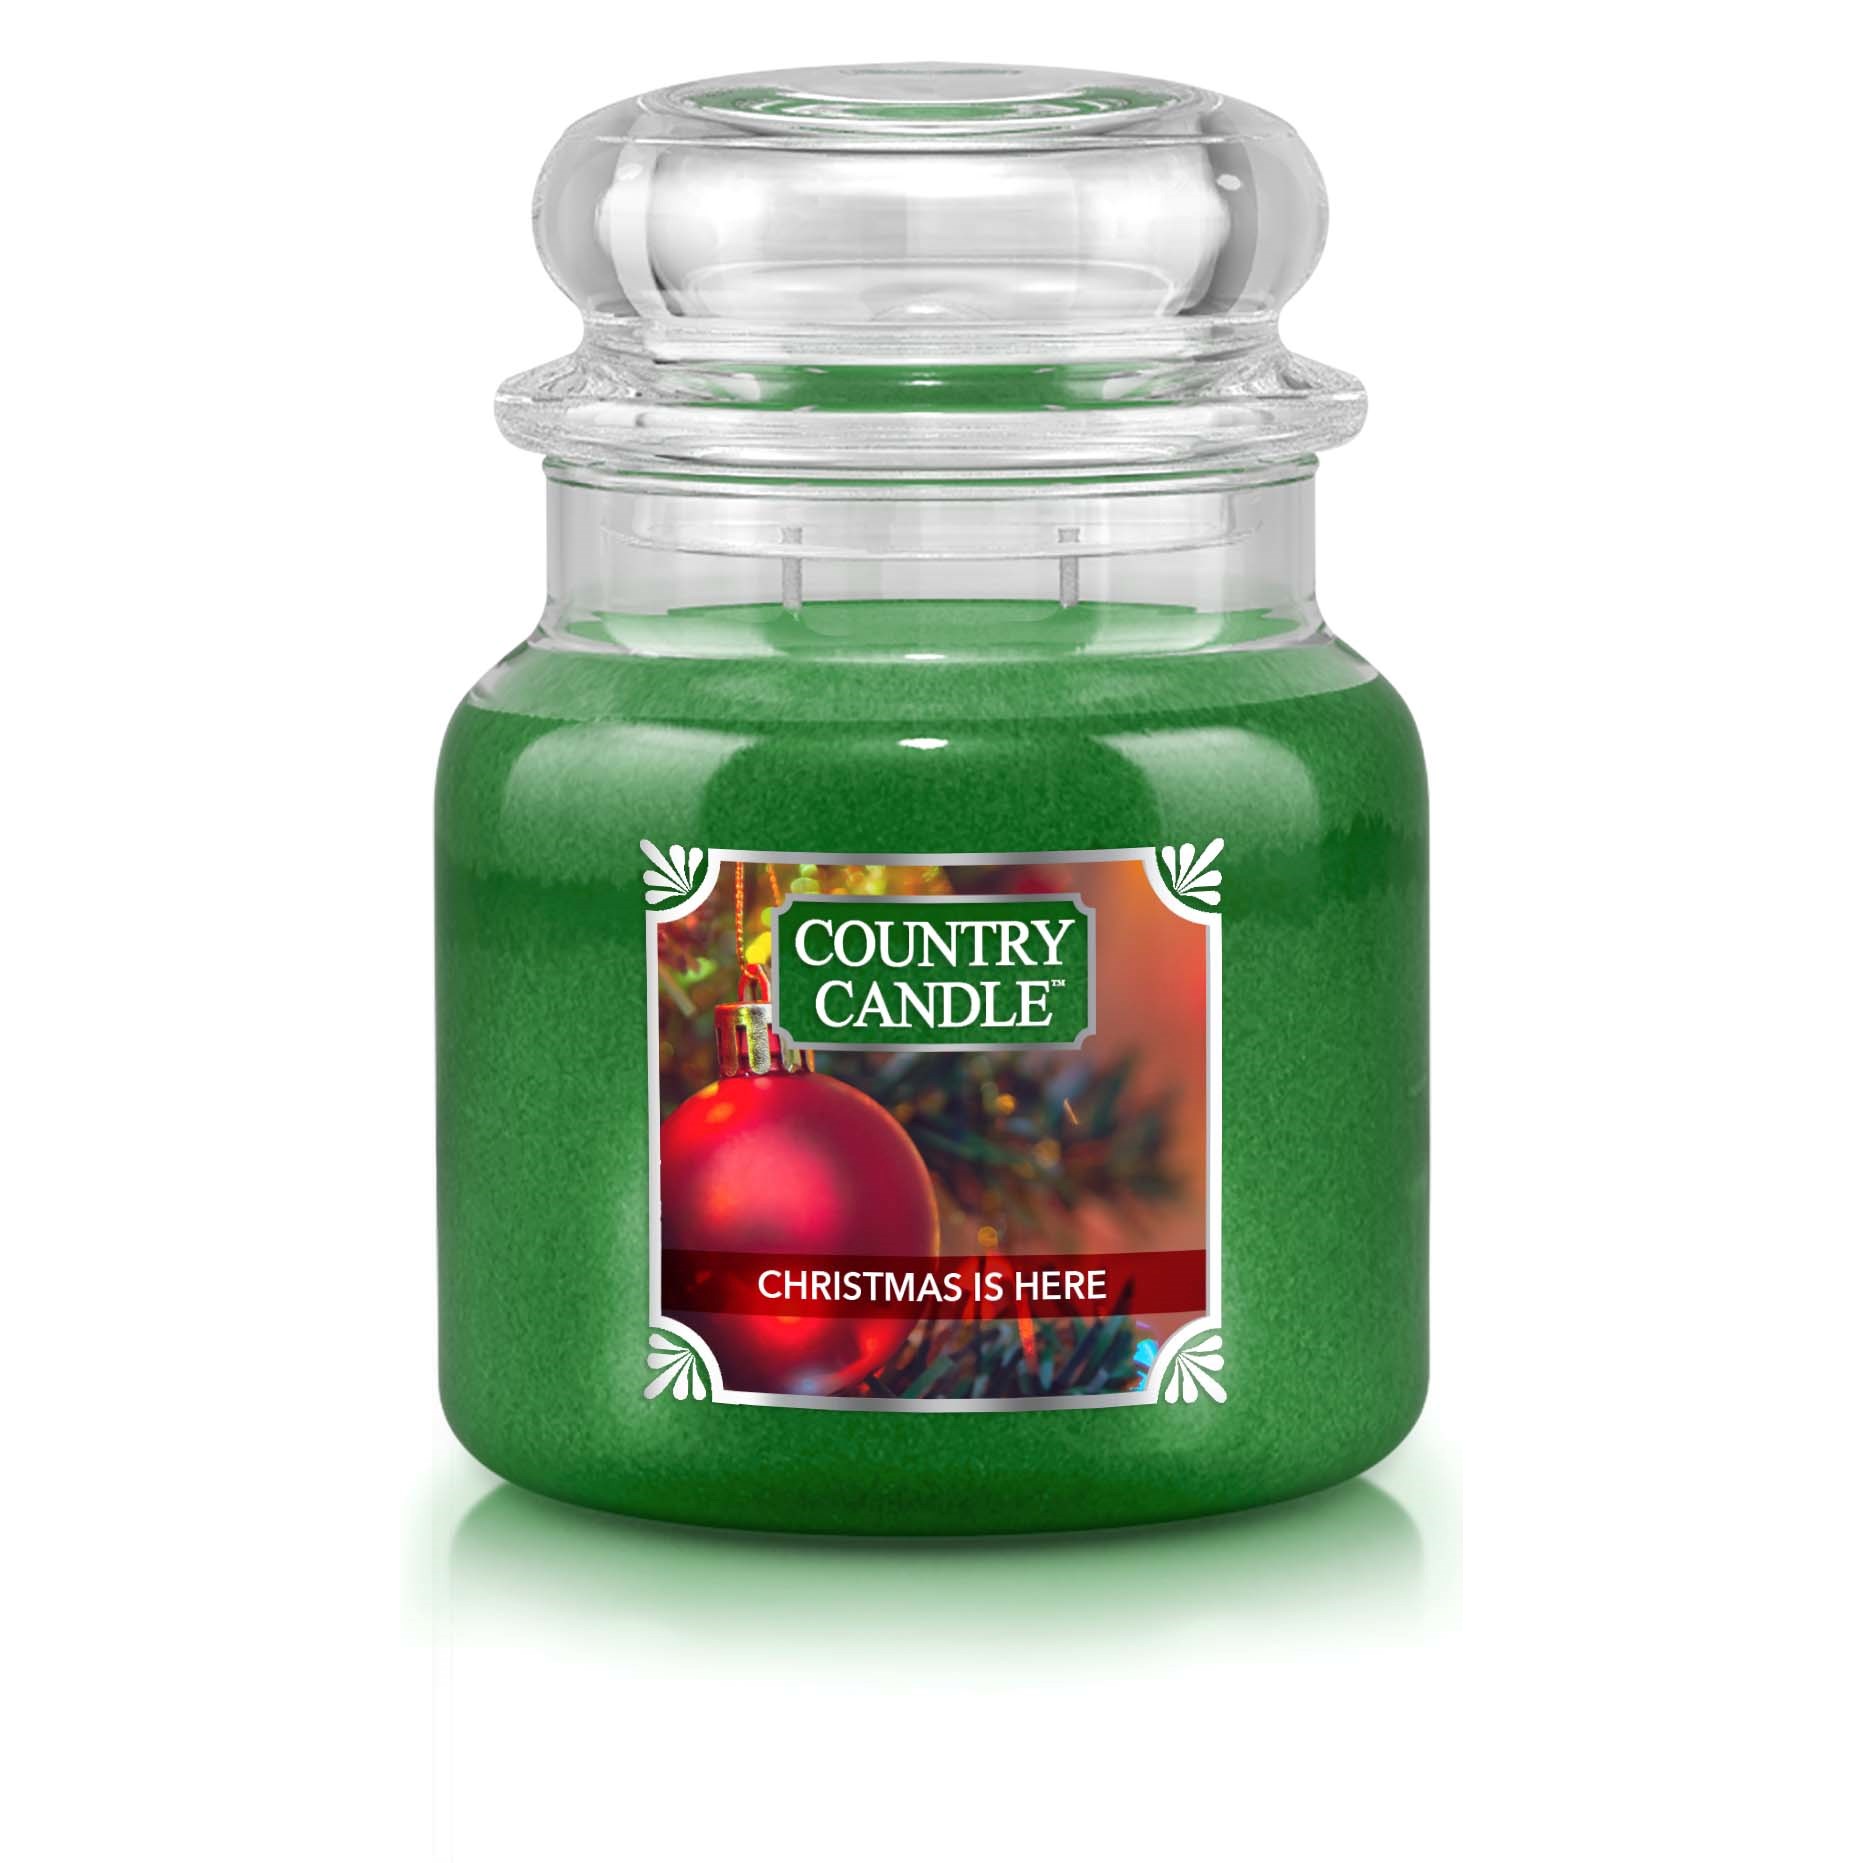 Country Candle Christmas Is Here Scented Candle Medium 453 g